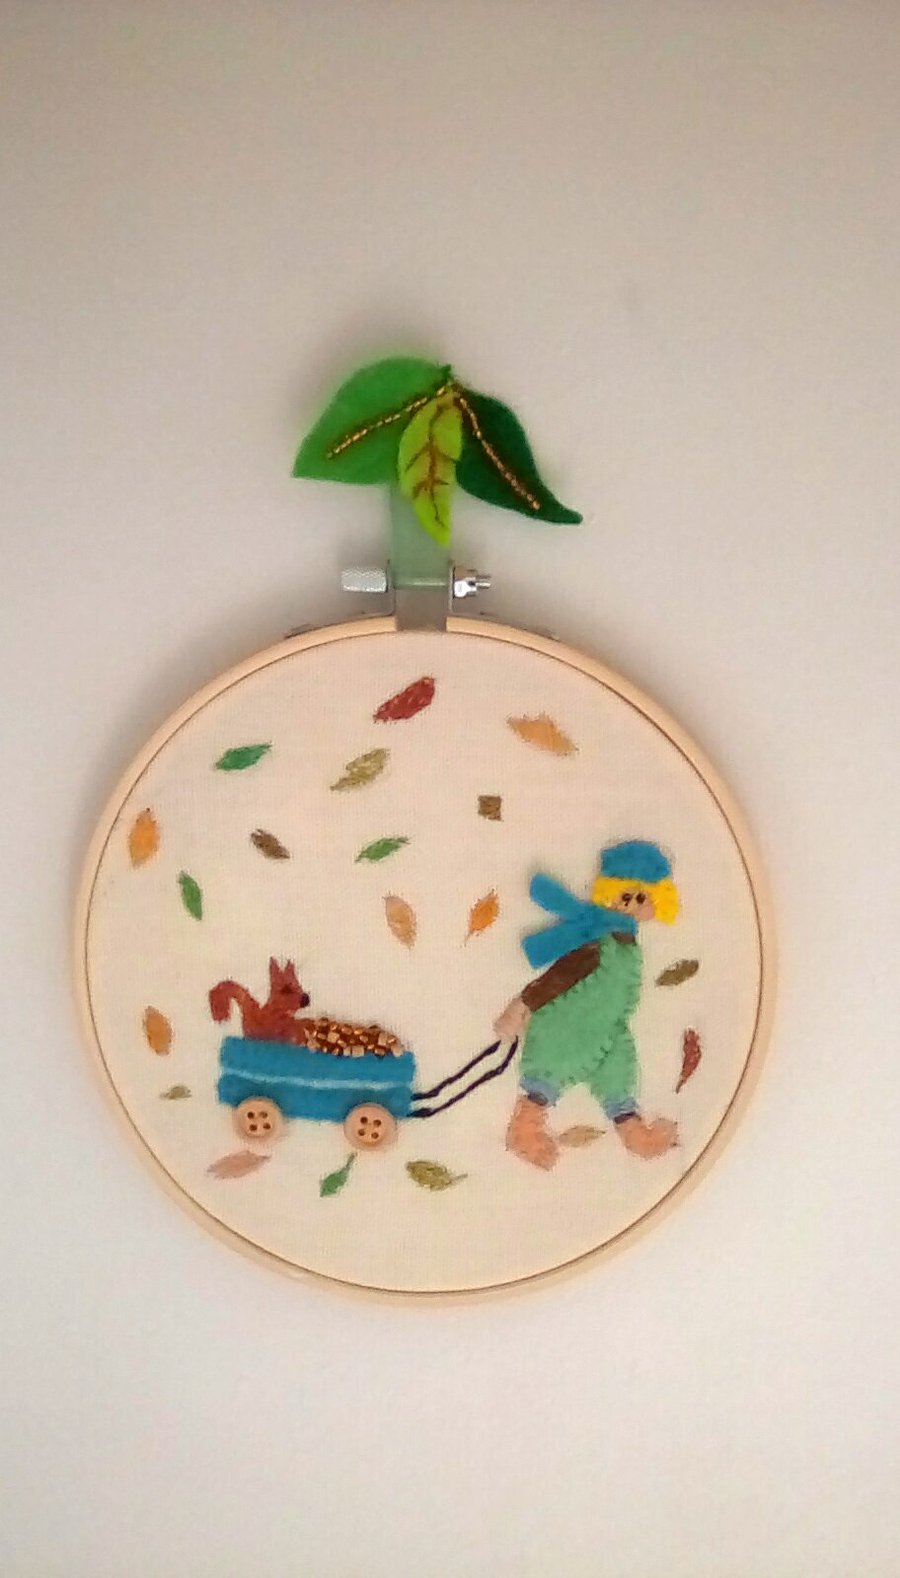 Embroidered Autumn Scene, Child's Embroidery, Embroidery Hoop